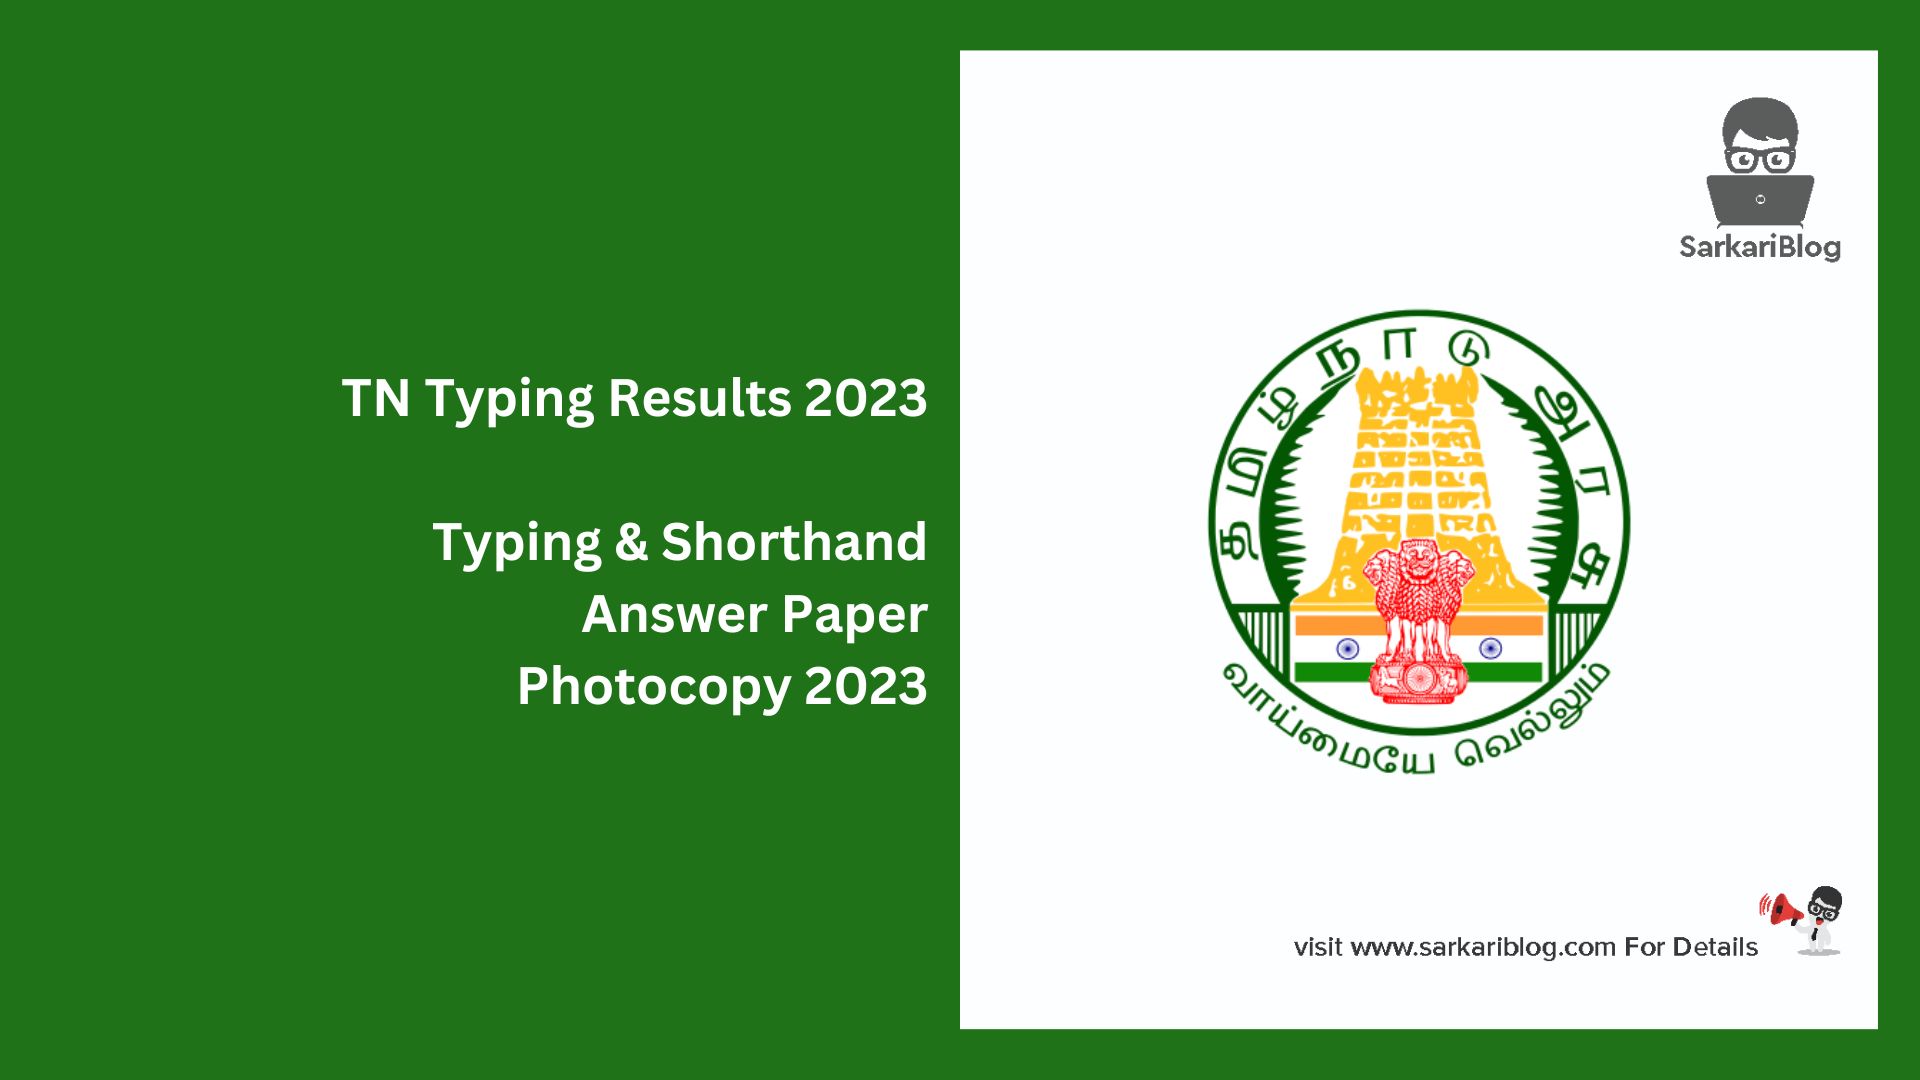 TN Typing Results 2023